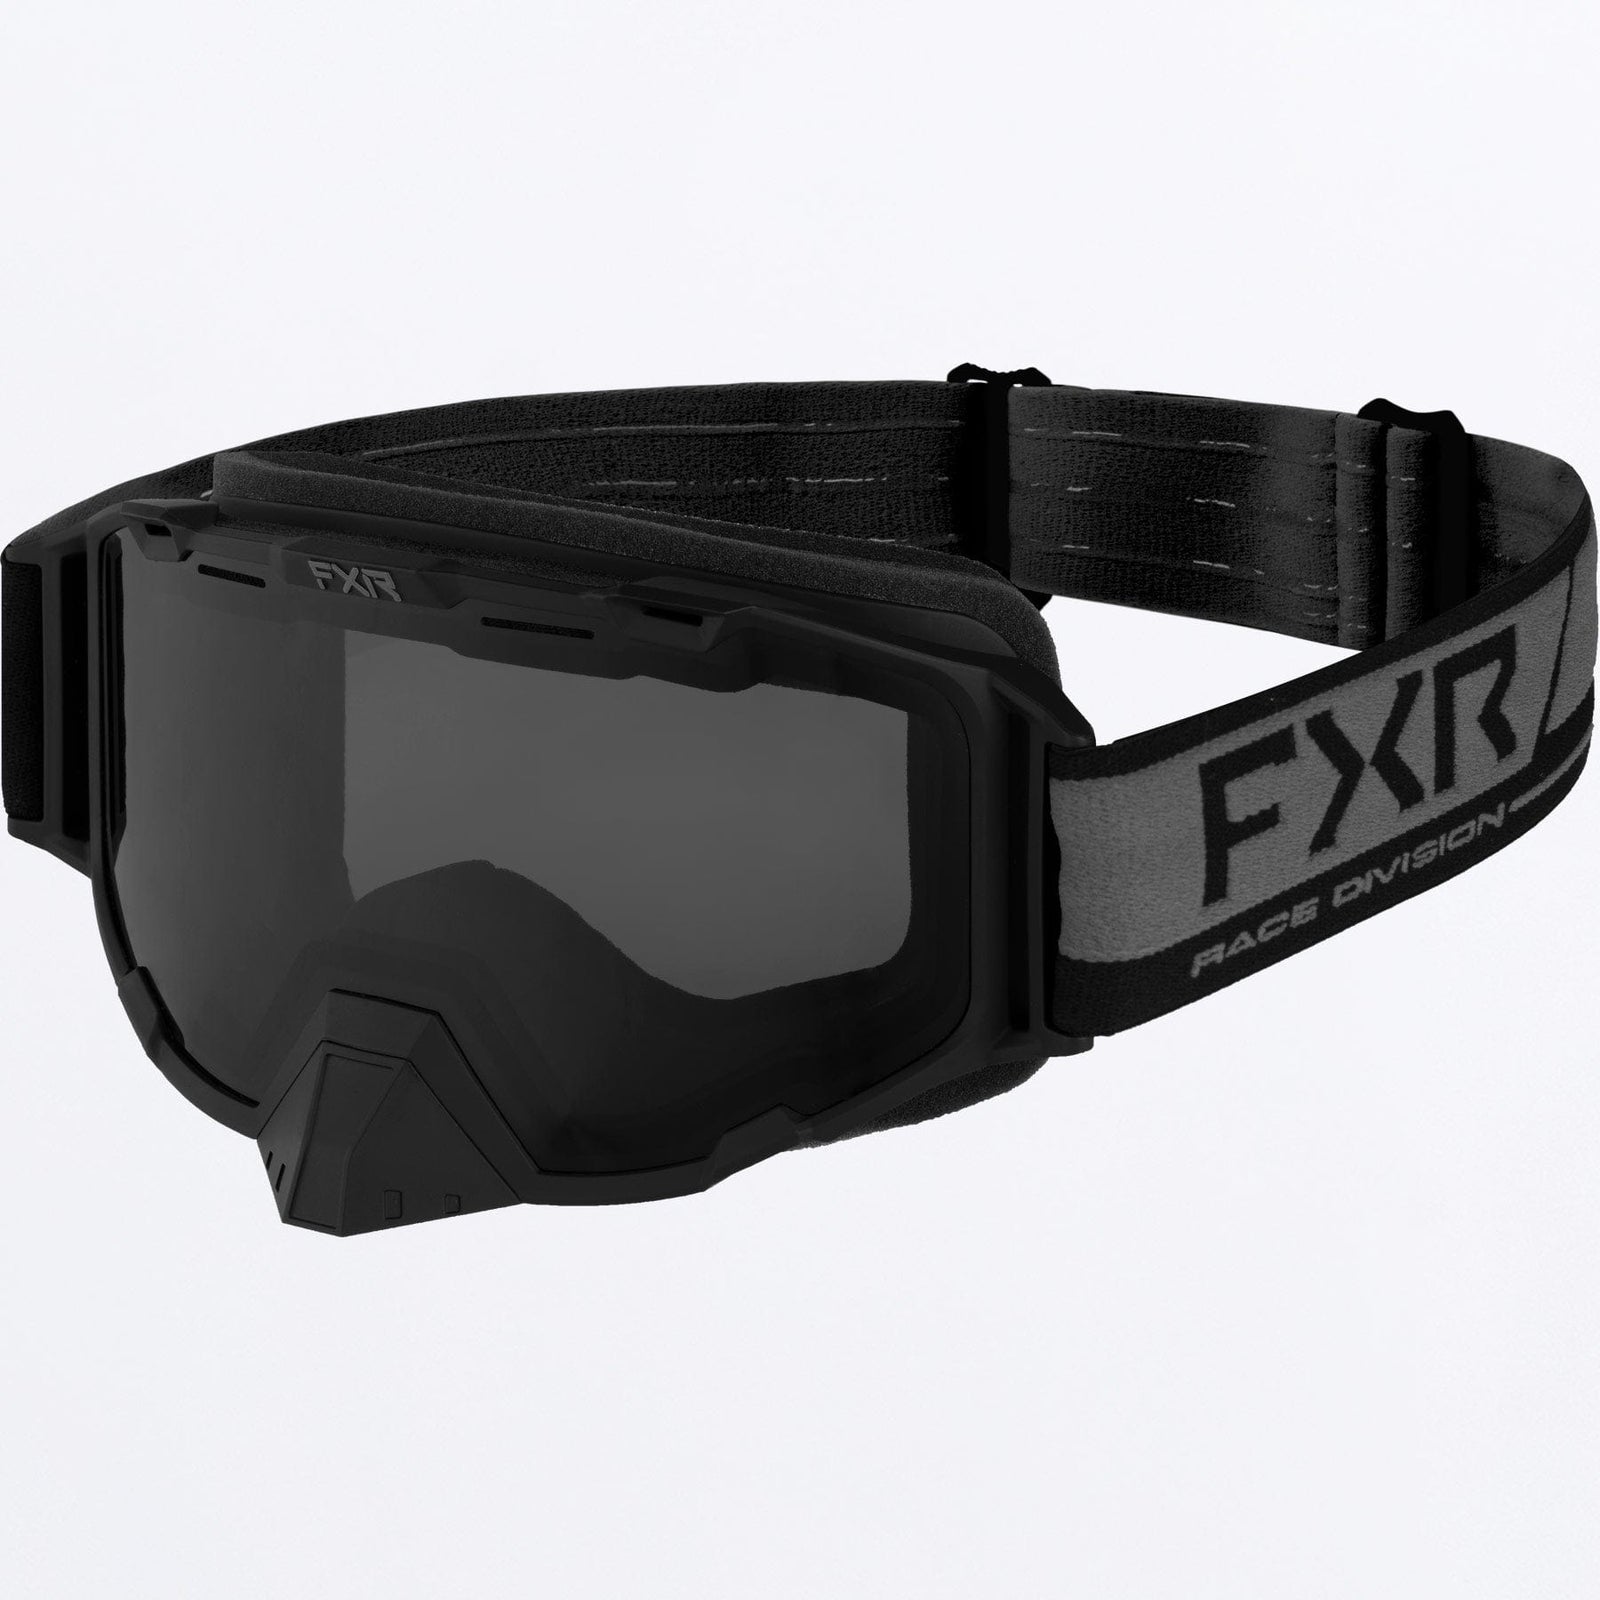 Shop FXR Goggles at Factory Recreation | Factory Recreation